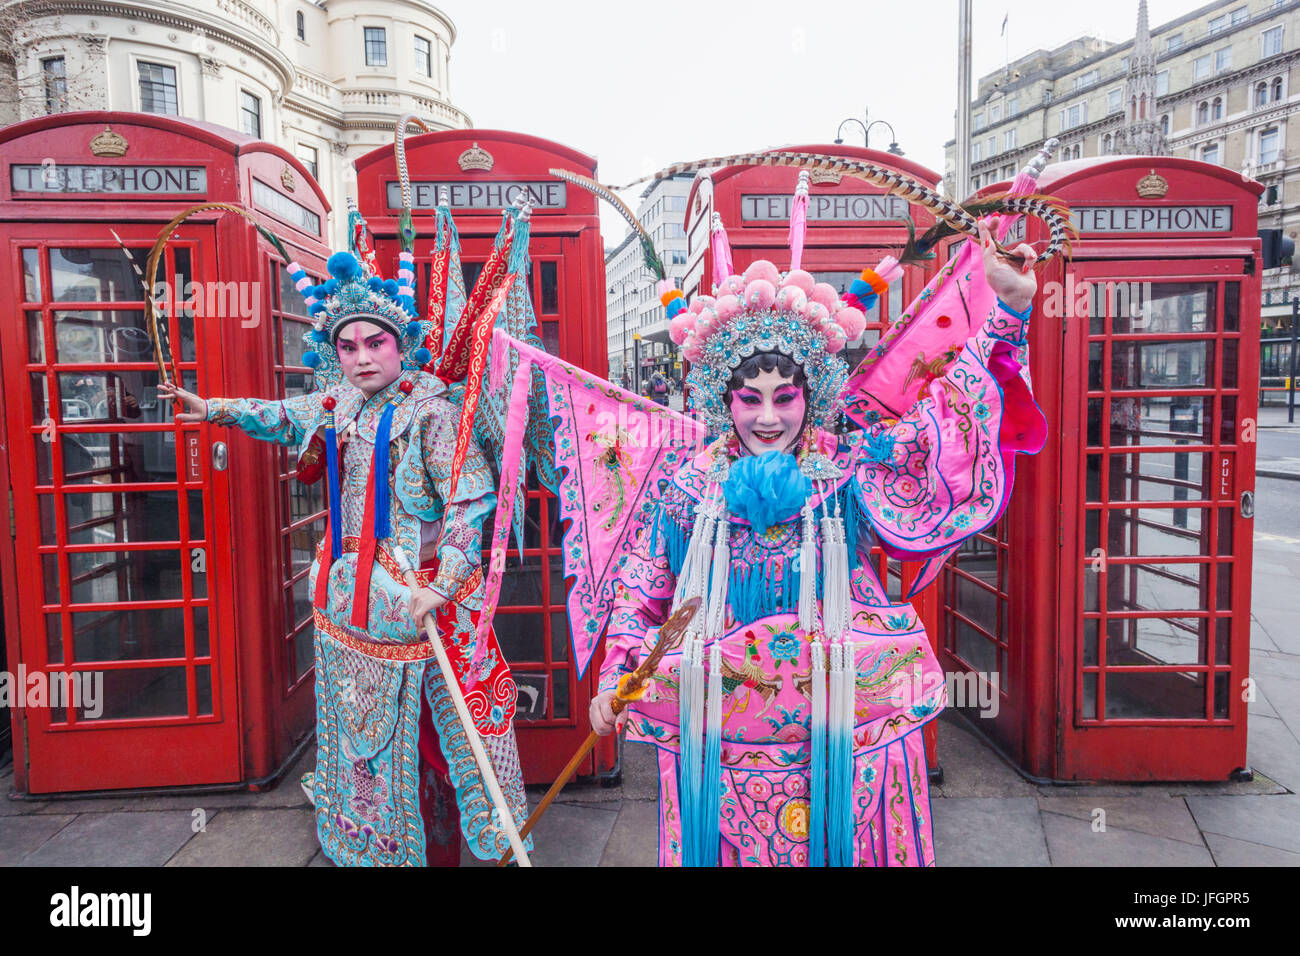 England, London, Soho, Chinatown, Chinese New Year Festival Parade, Couple Dressed in Chinese Opera Costume and Telephone Boxes Stock Photo